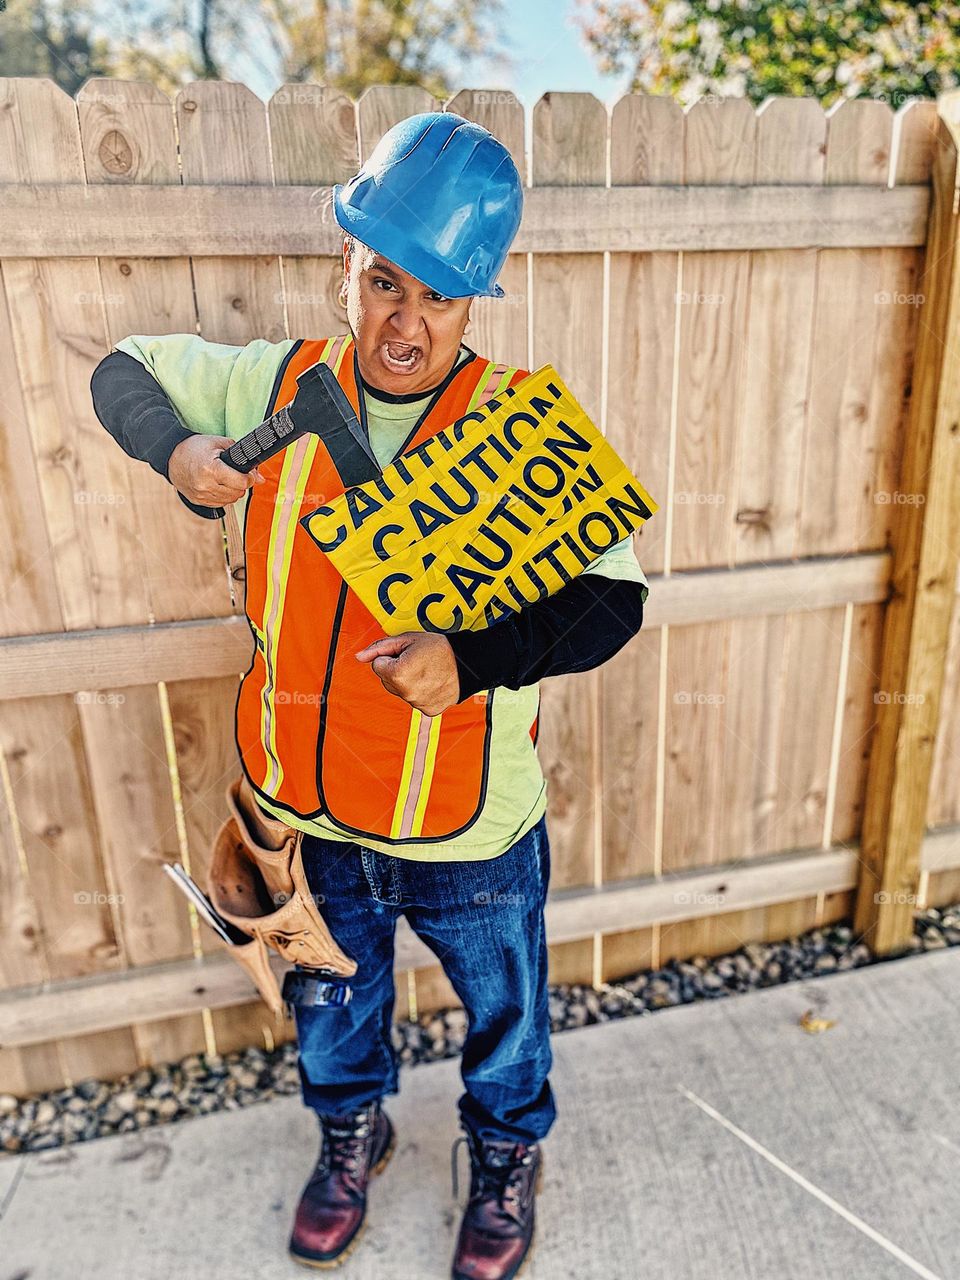 Woman dresses as construction worker for Halloween, woman ready for trick or treat, wearing costumes on Halloween, trick or treat night with kids, having fun with family themed costumes, construction workers costumes 